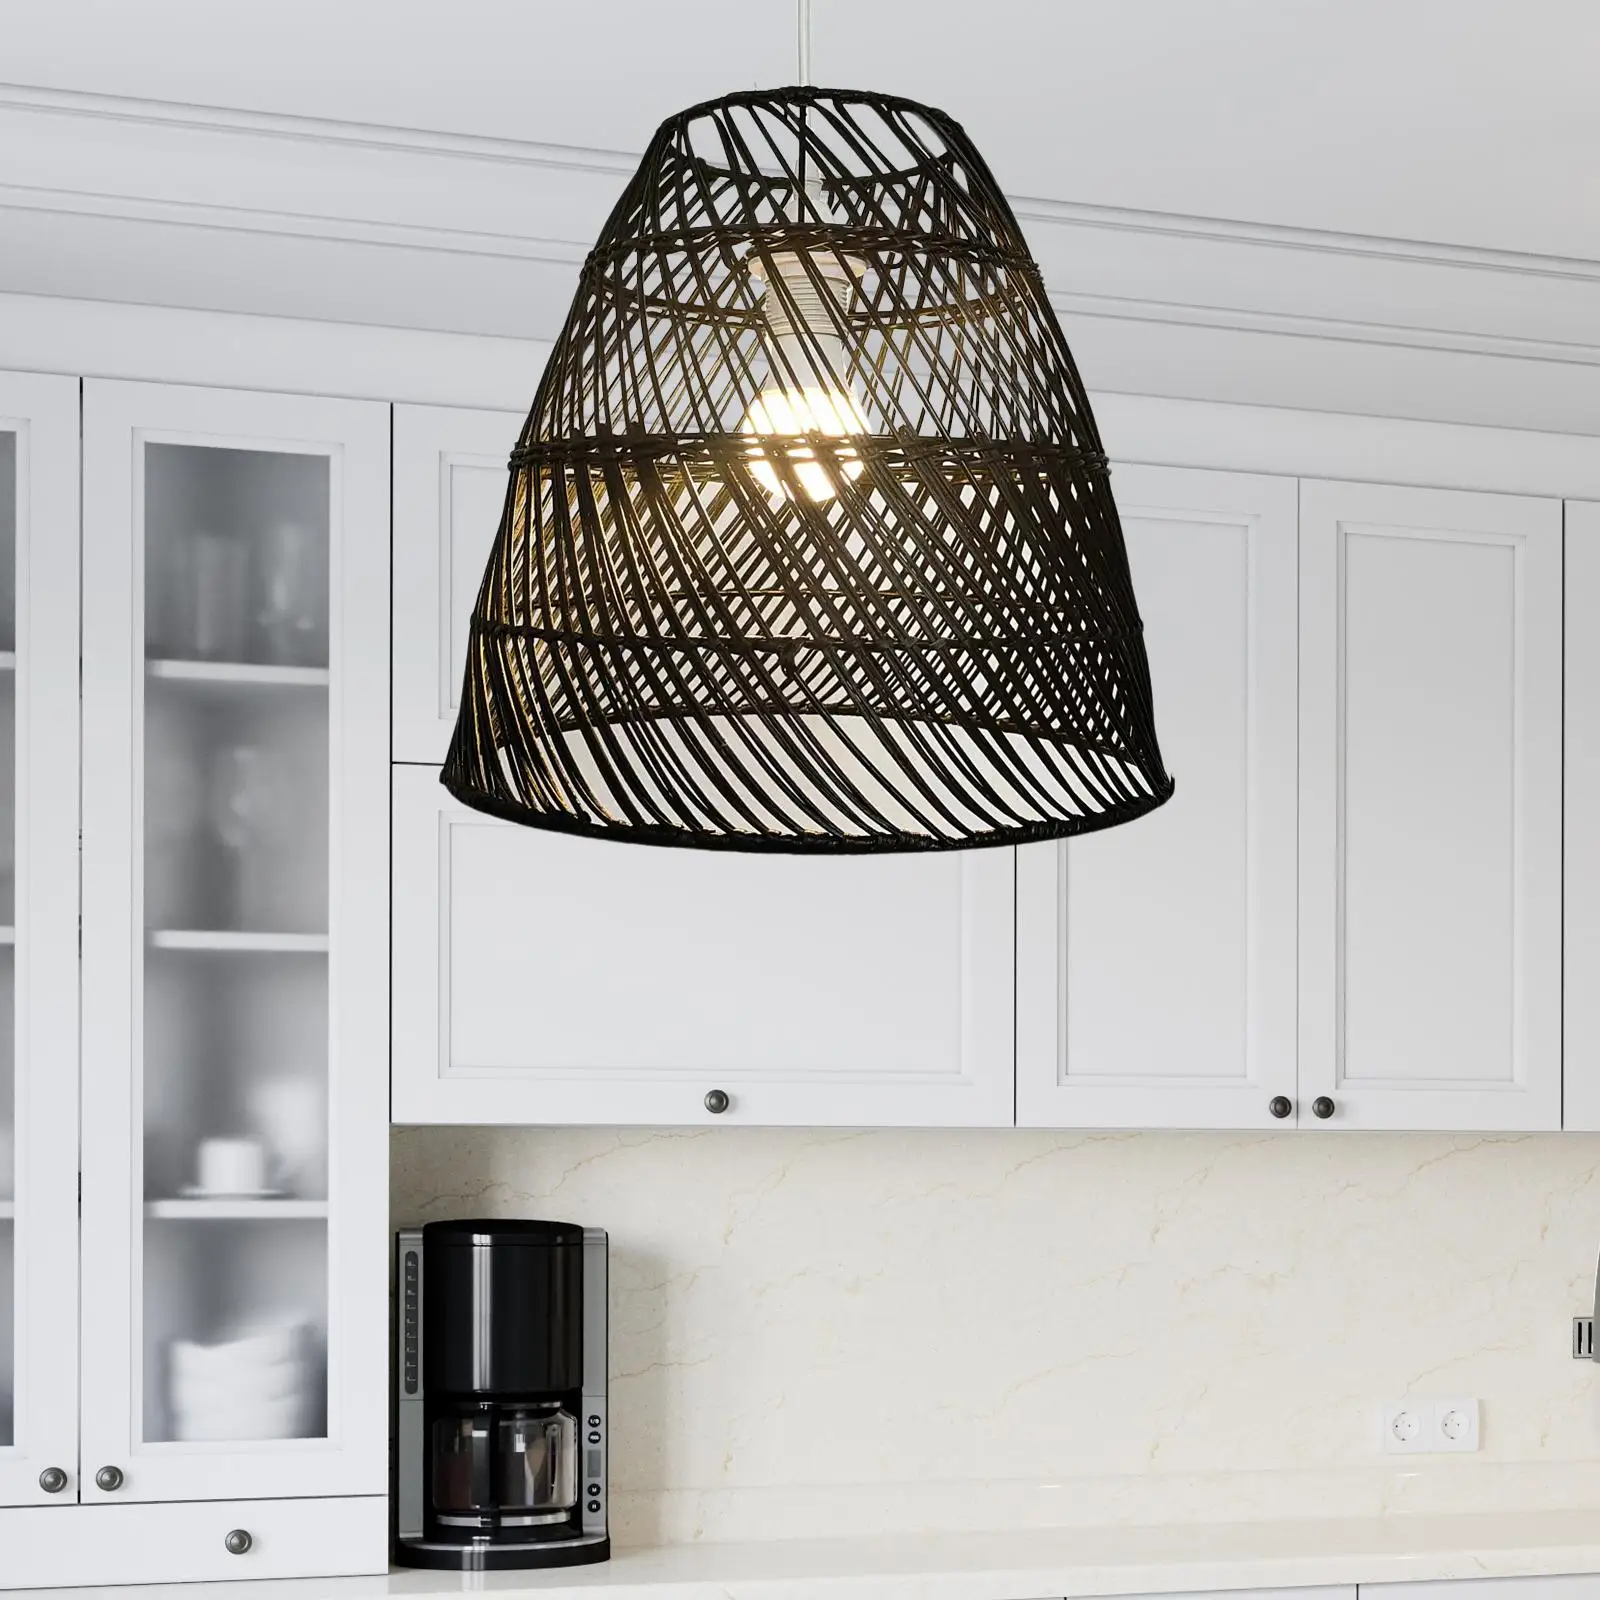 Rattan Woven Lamp Shade Retro Woven Pendant Lampshade Hanging Light Cover for Kitchen Cafe Restaurant Bedroom Dining Room